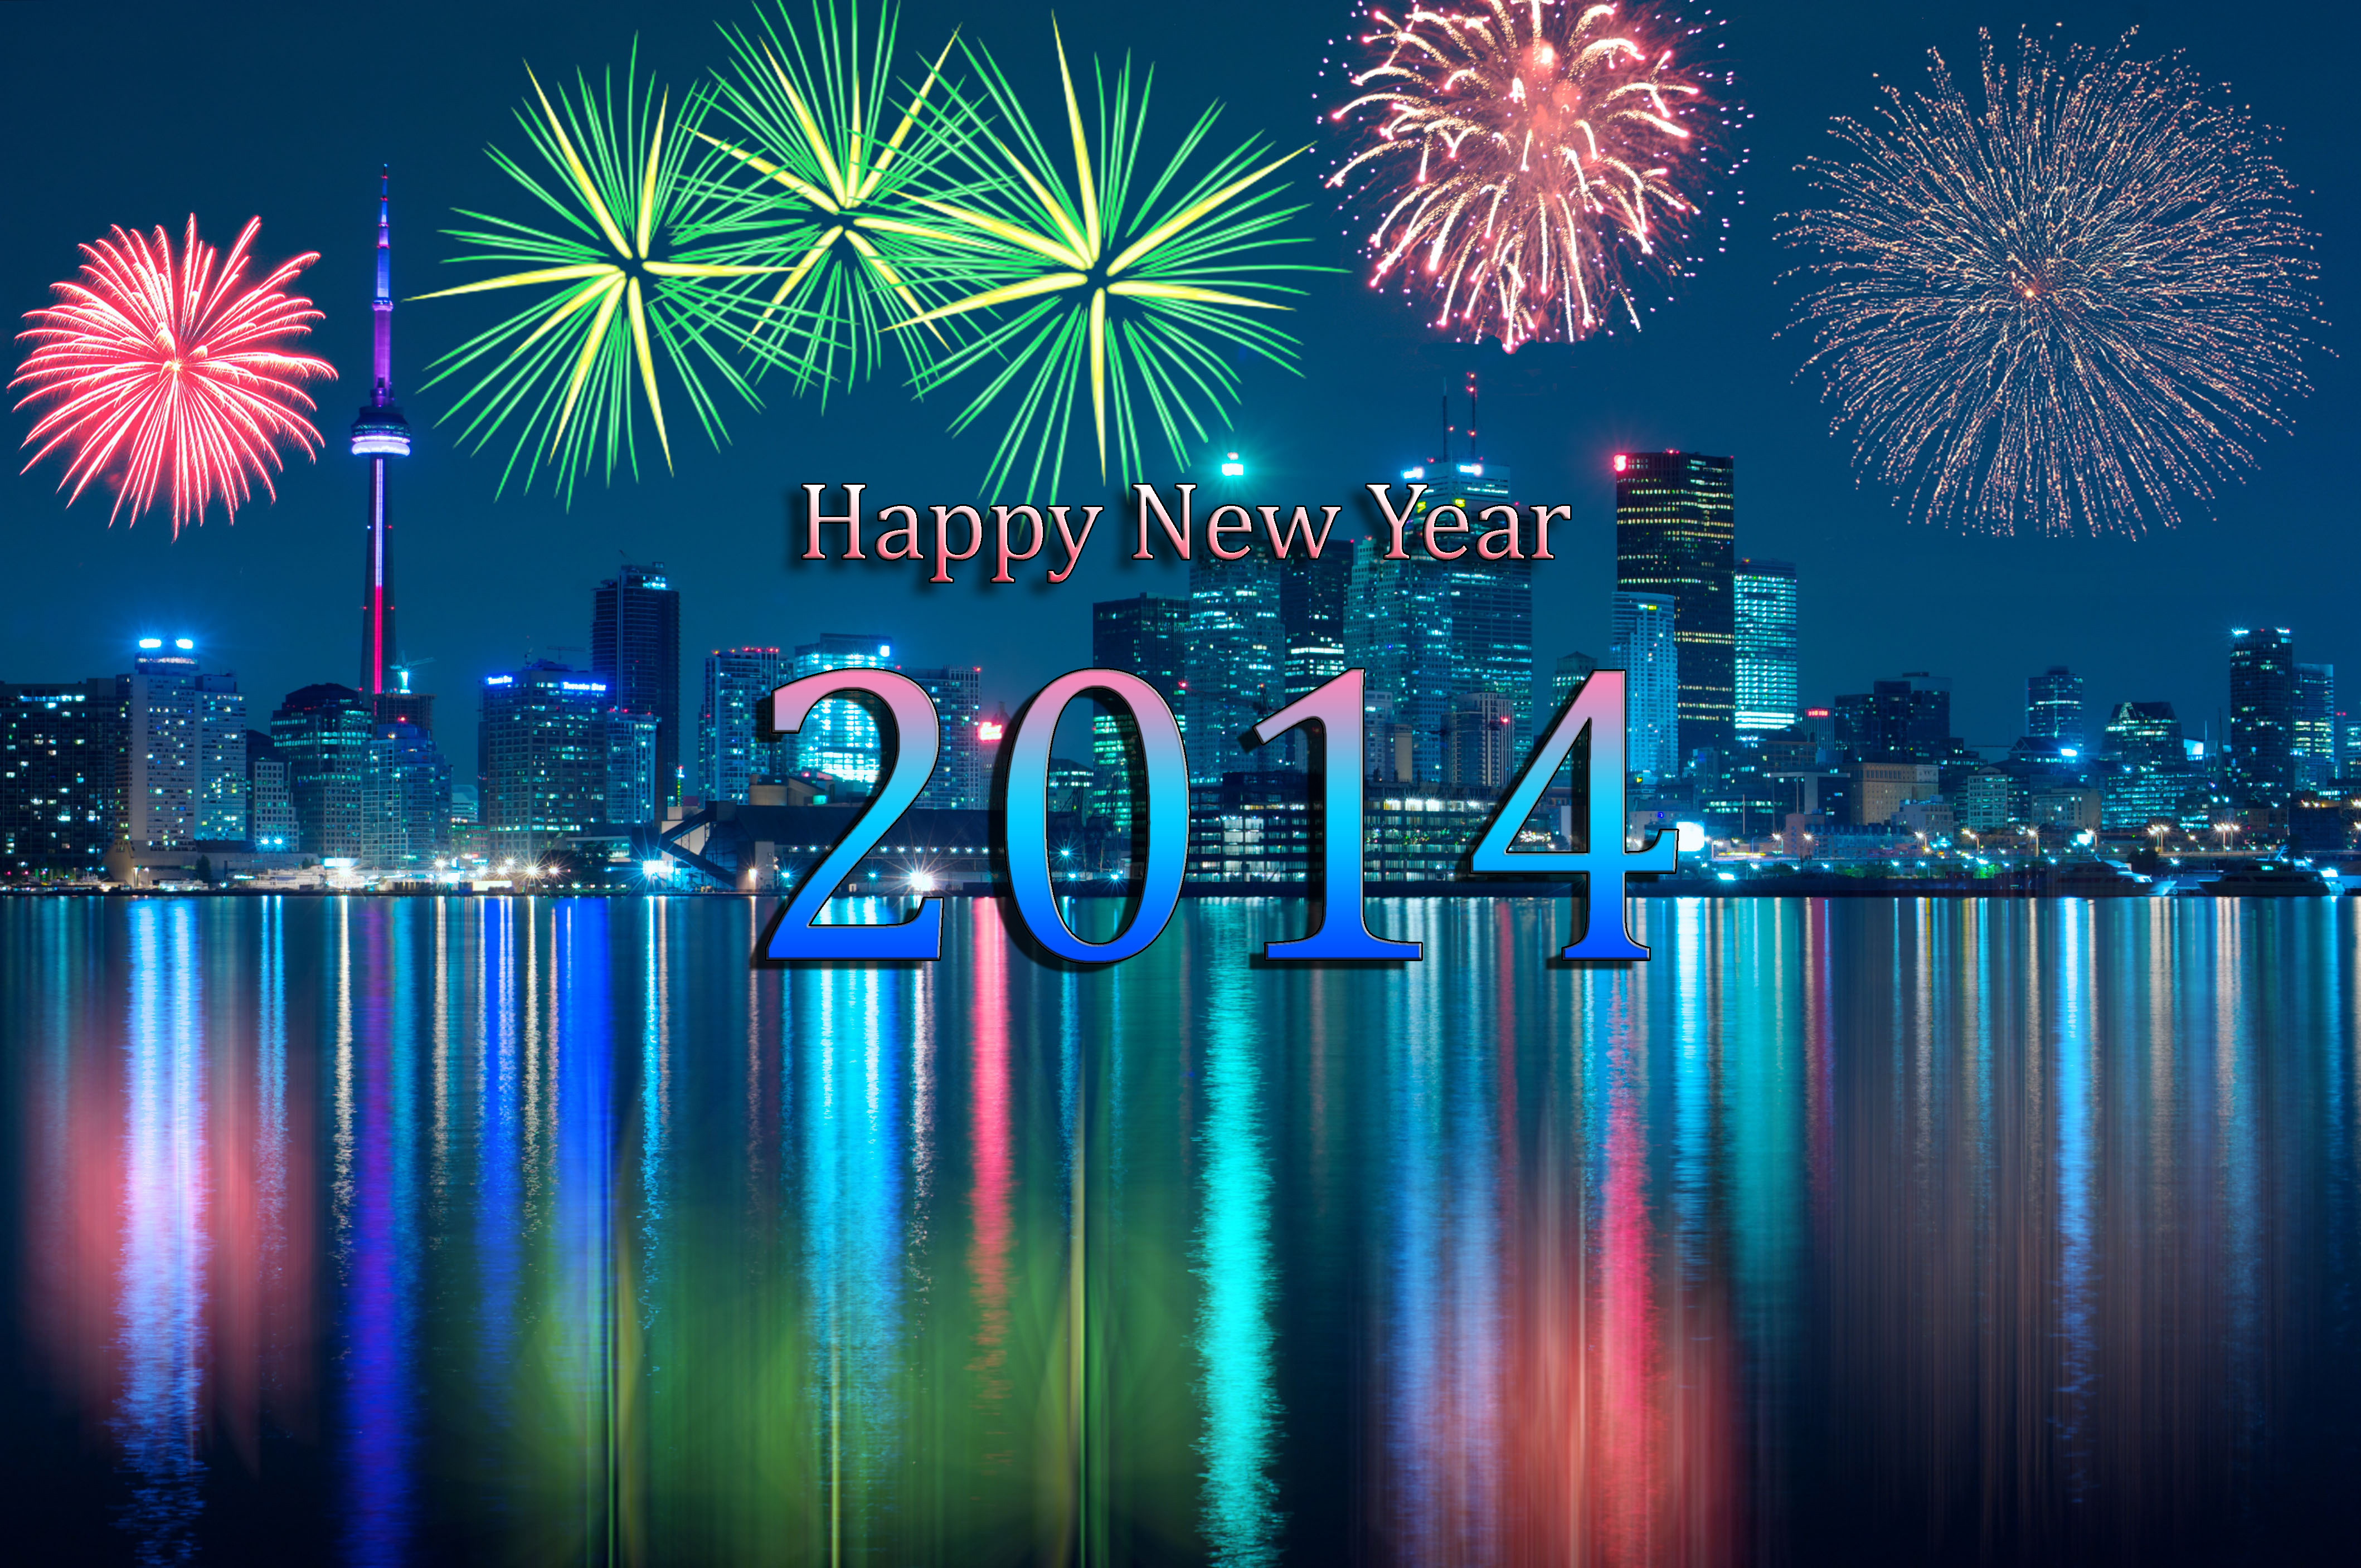 New Year wallpapers New Year 2014 on a background of fireworks 047624